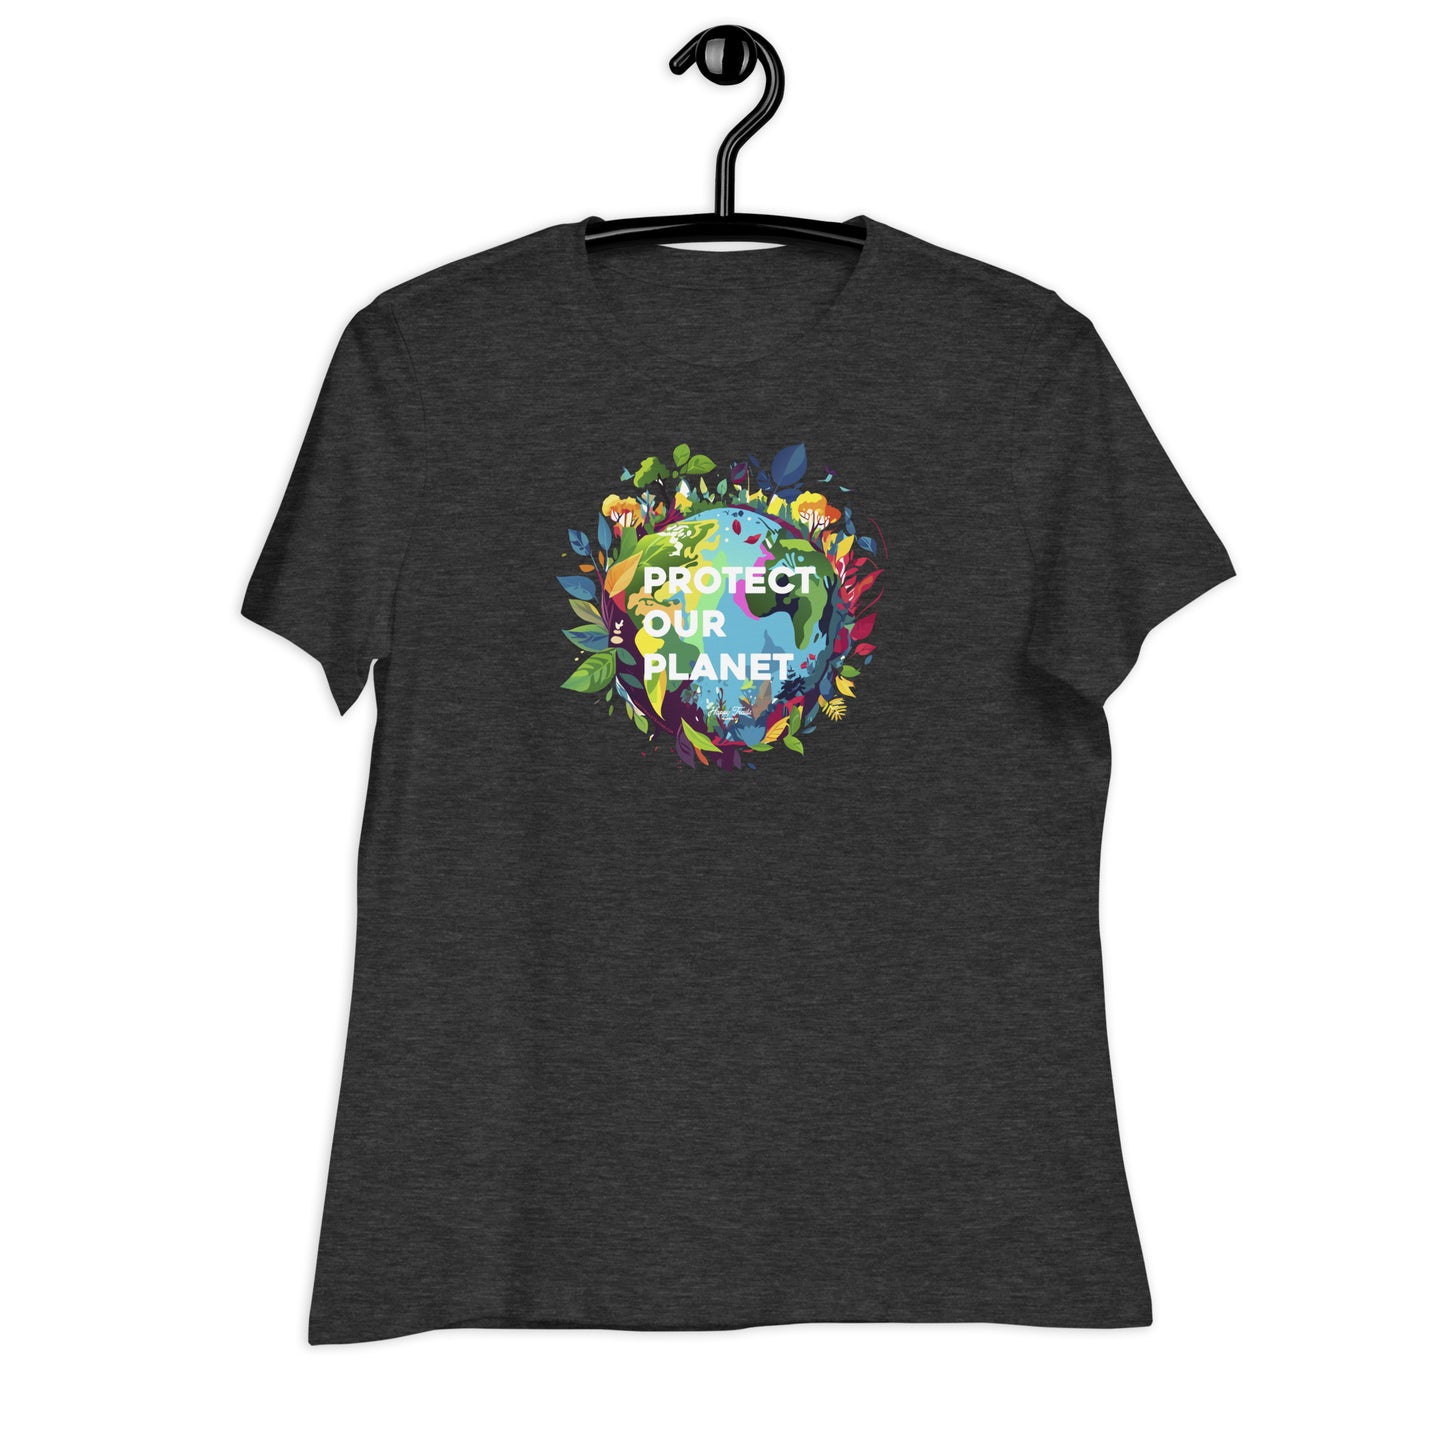 Protect Our Planet - Women's Relaxed T-Shirt